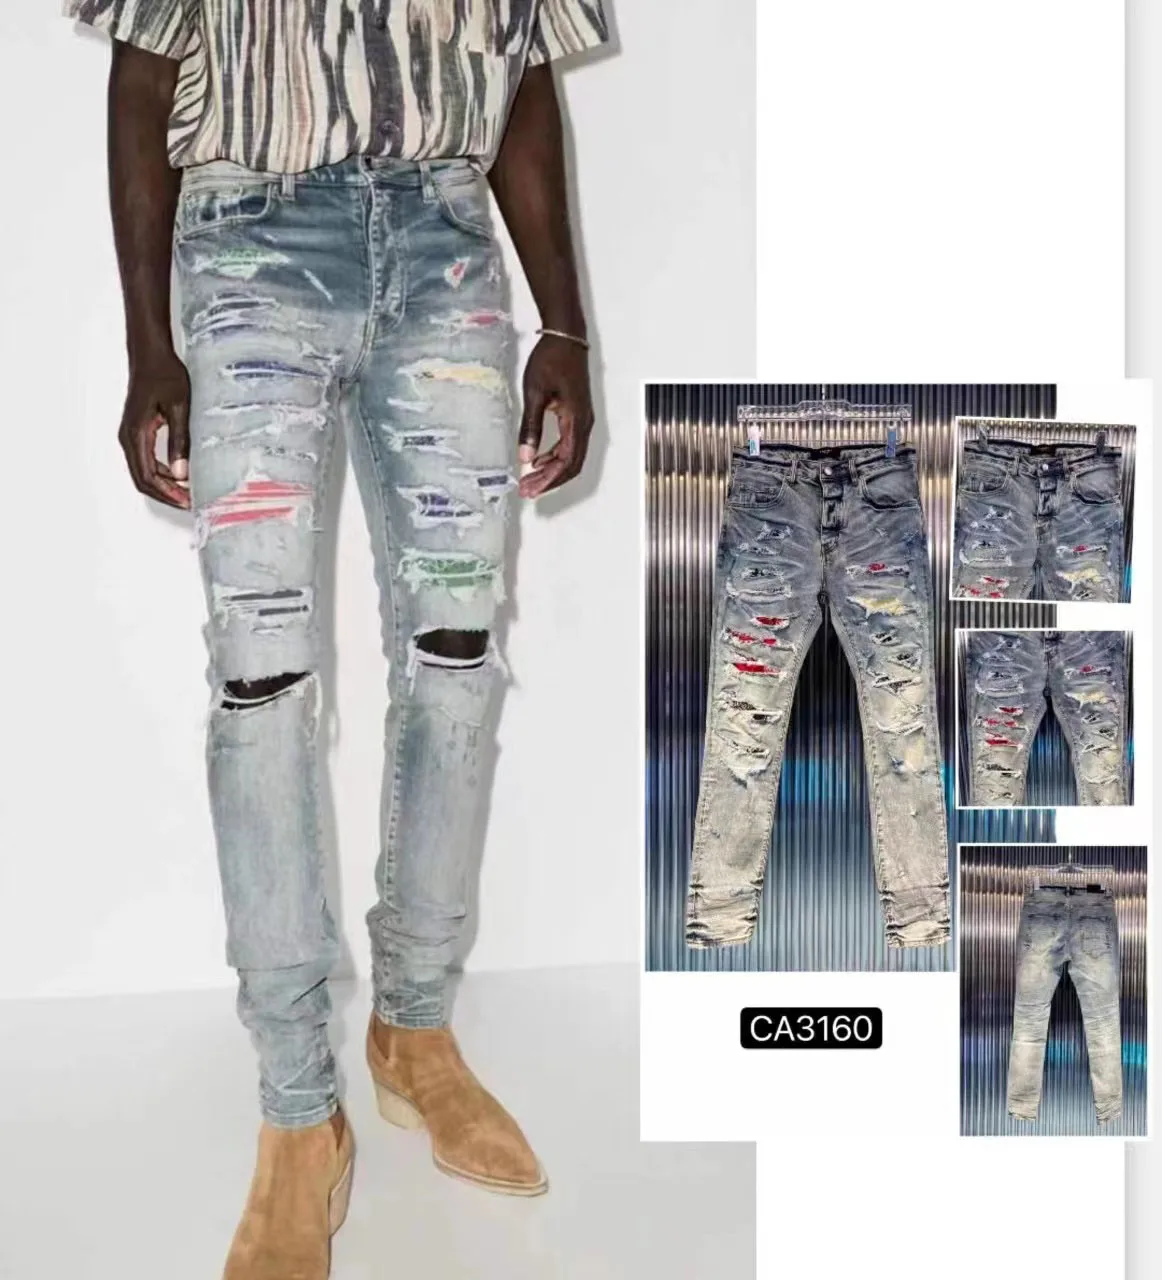 New AM Men's Jeans Male Ripped Patch Star Patch Washed Wrinkled European and American Trend Casual Slim Jeans for Men And Women